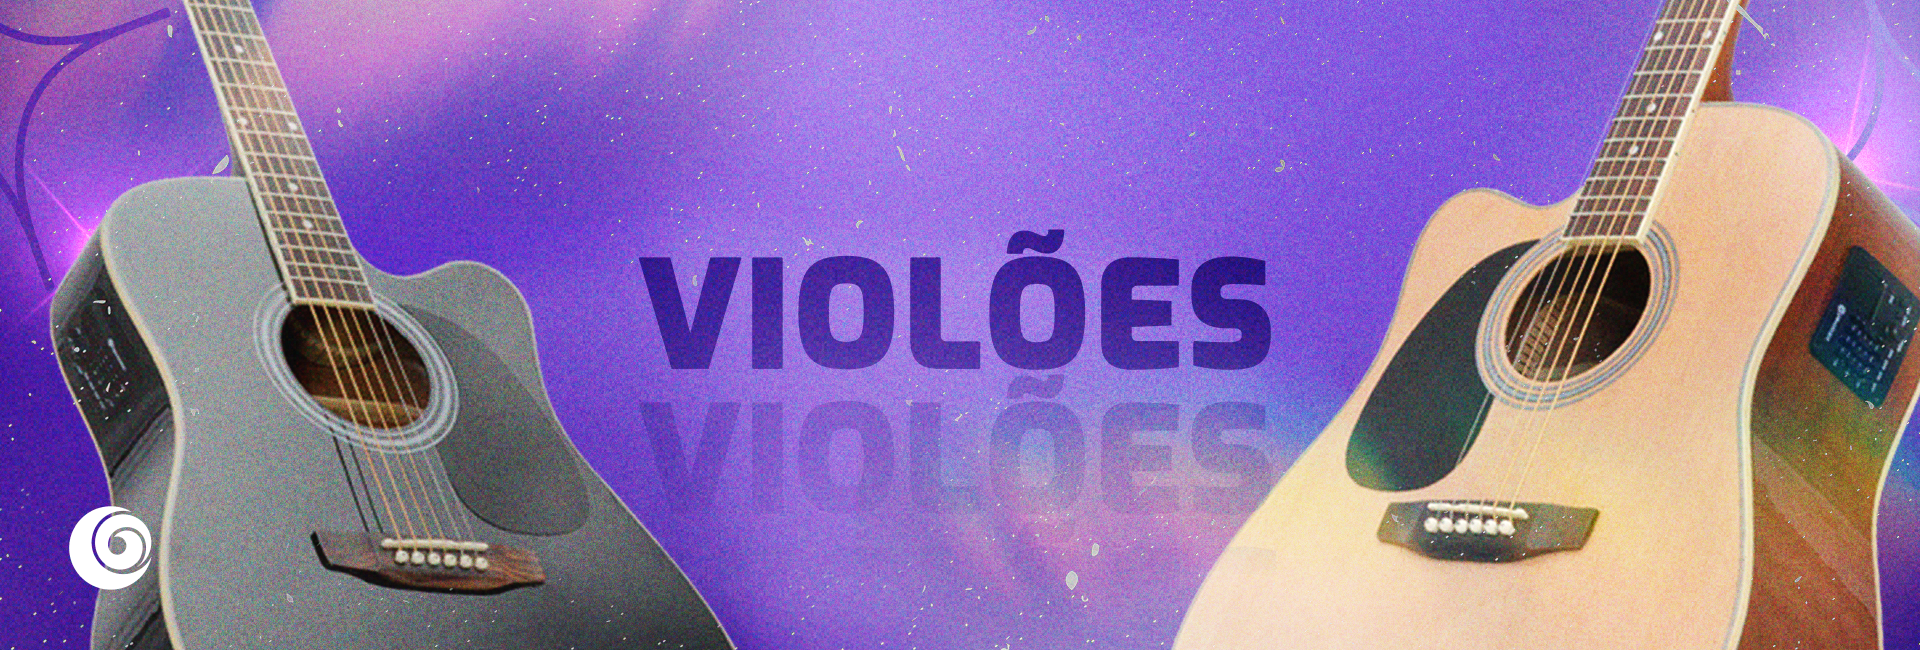 Violoes_-_1920x650